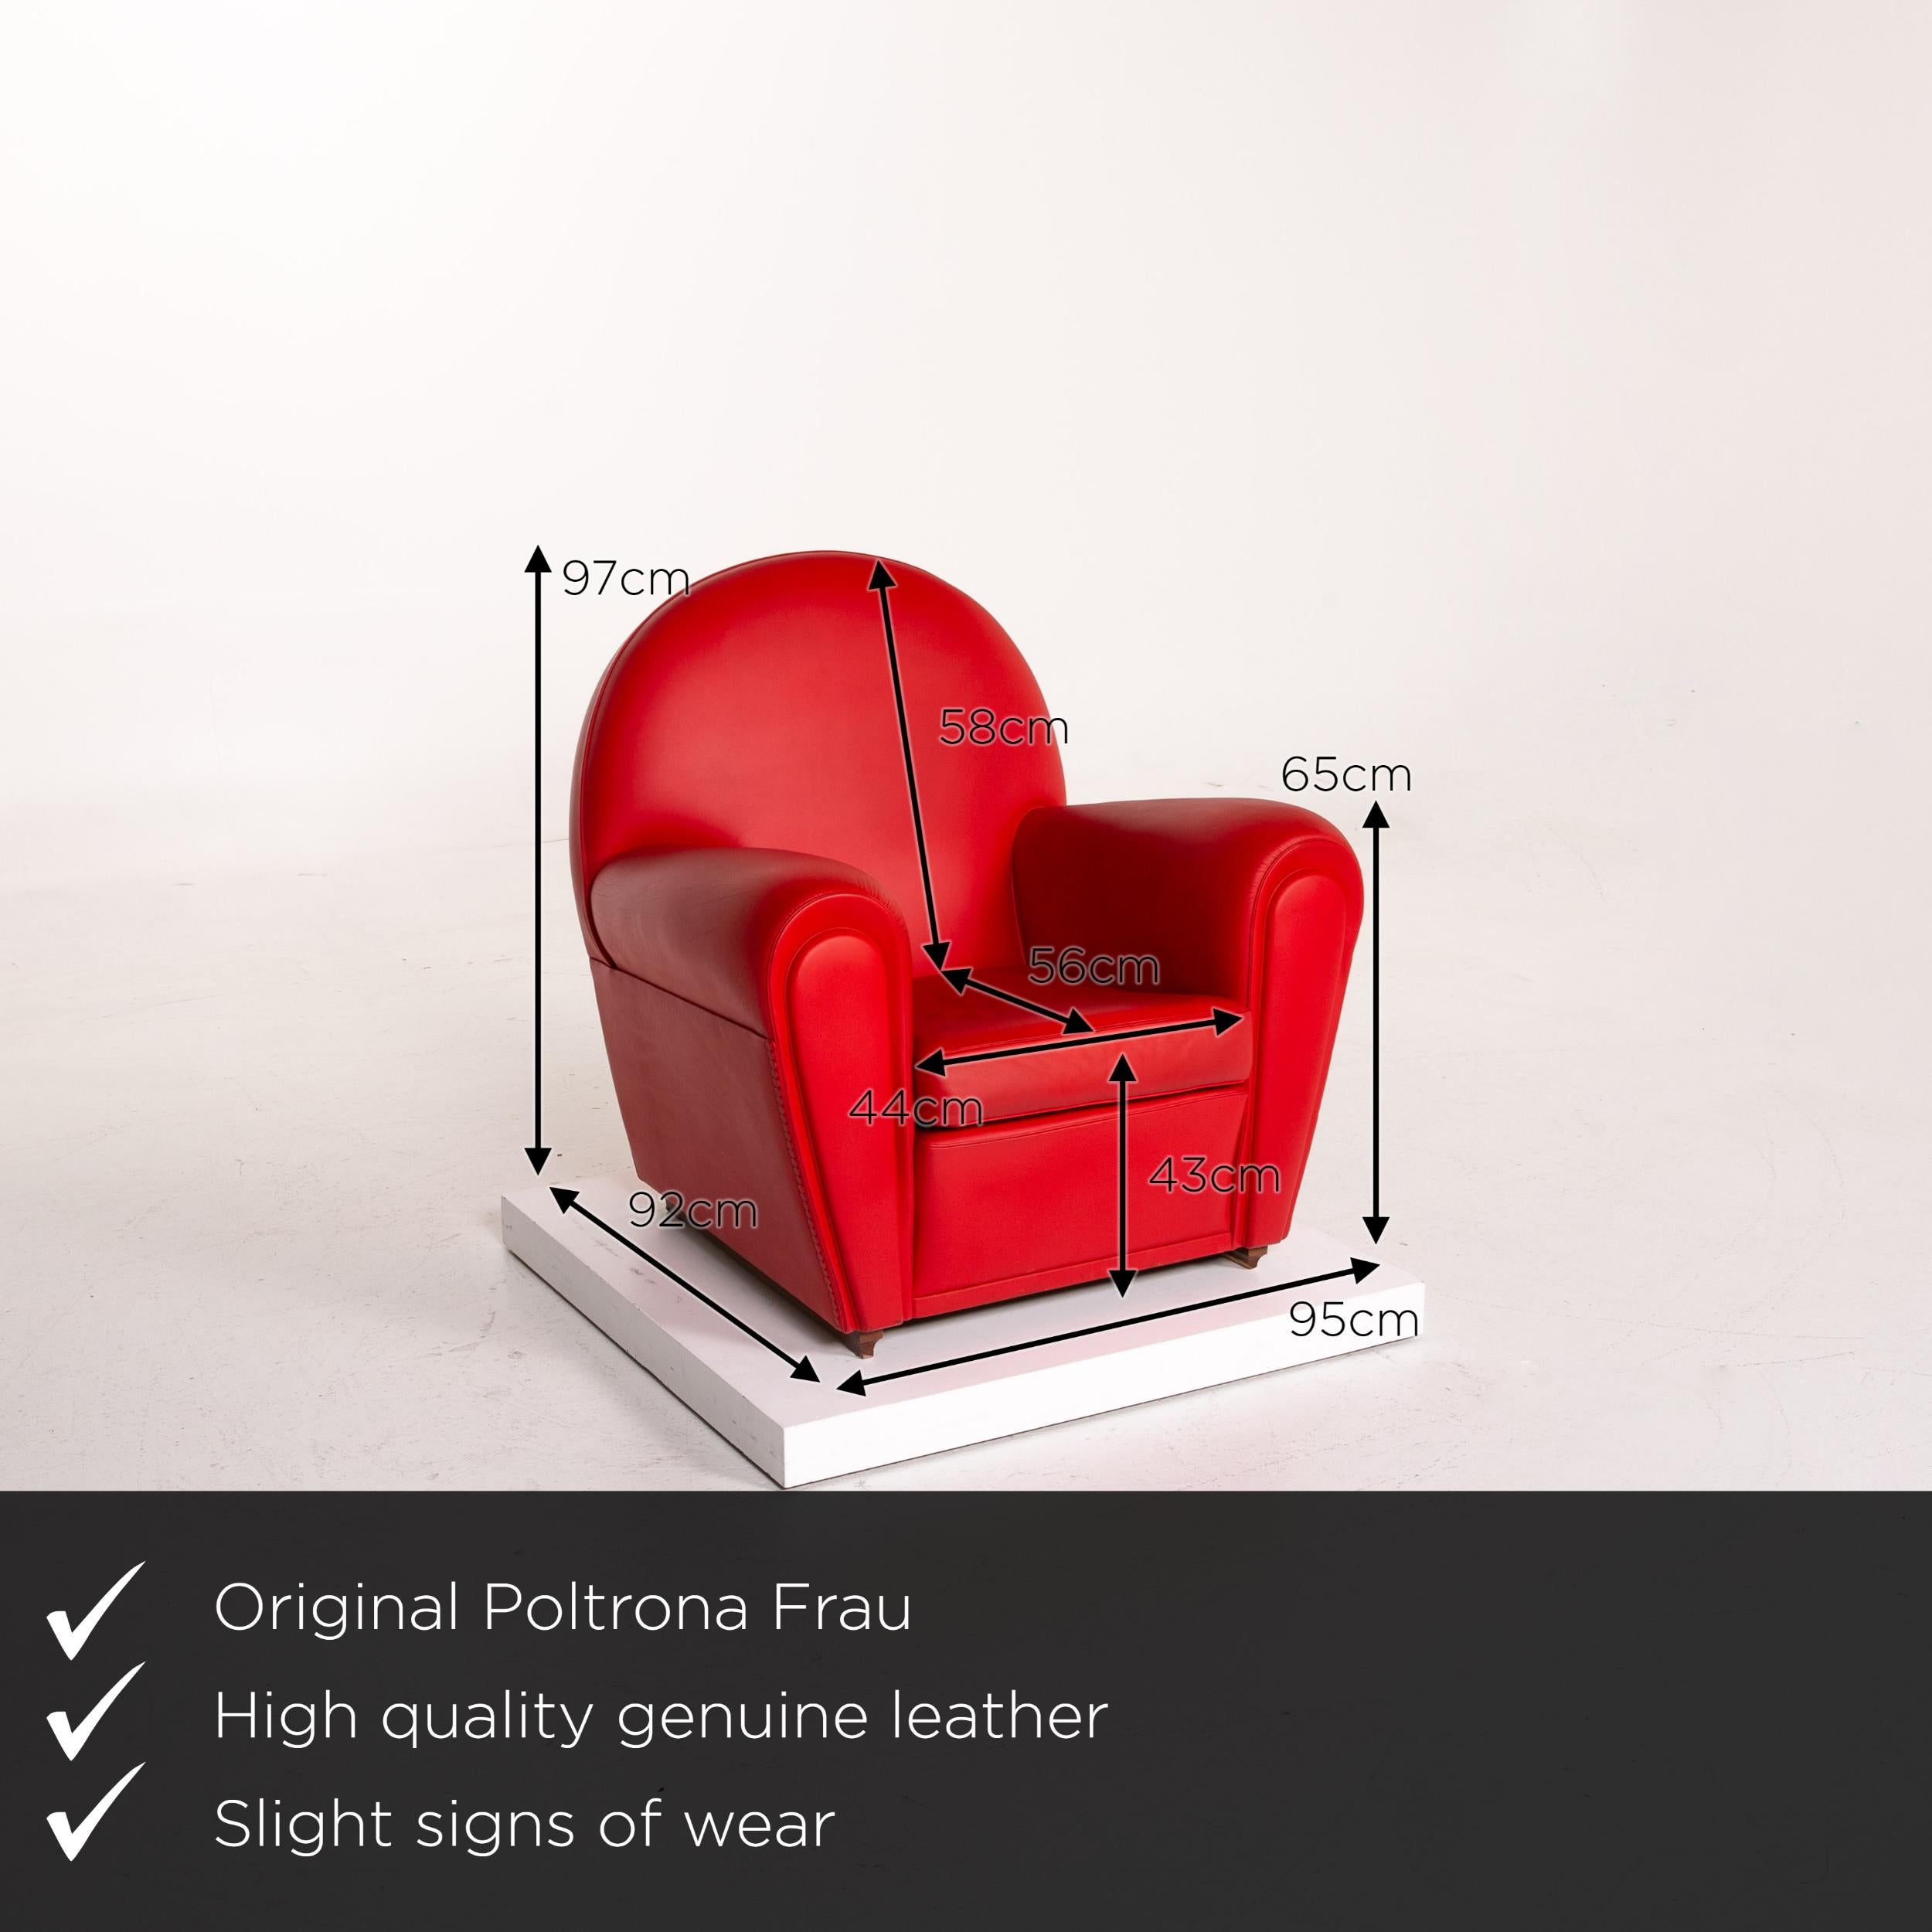 We present to you a Poltrona Frau Vanity Fair leather armchair red.
 

 Product measurements in centimeters:
 

Depth 92
Width 95
Height 97
Seat height 43
Rest height 65
Seat depth 56
Seat width 44
Back height 58.
 